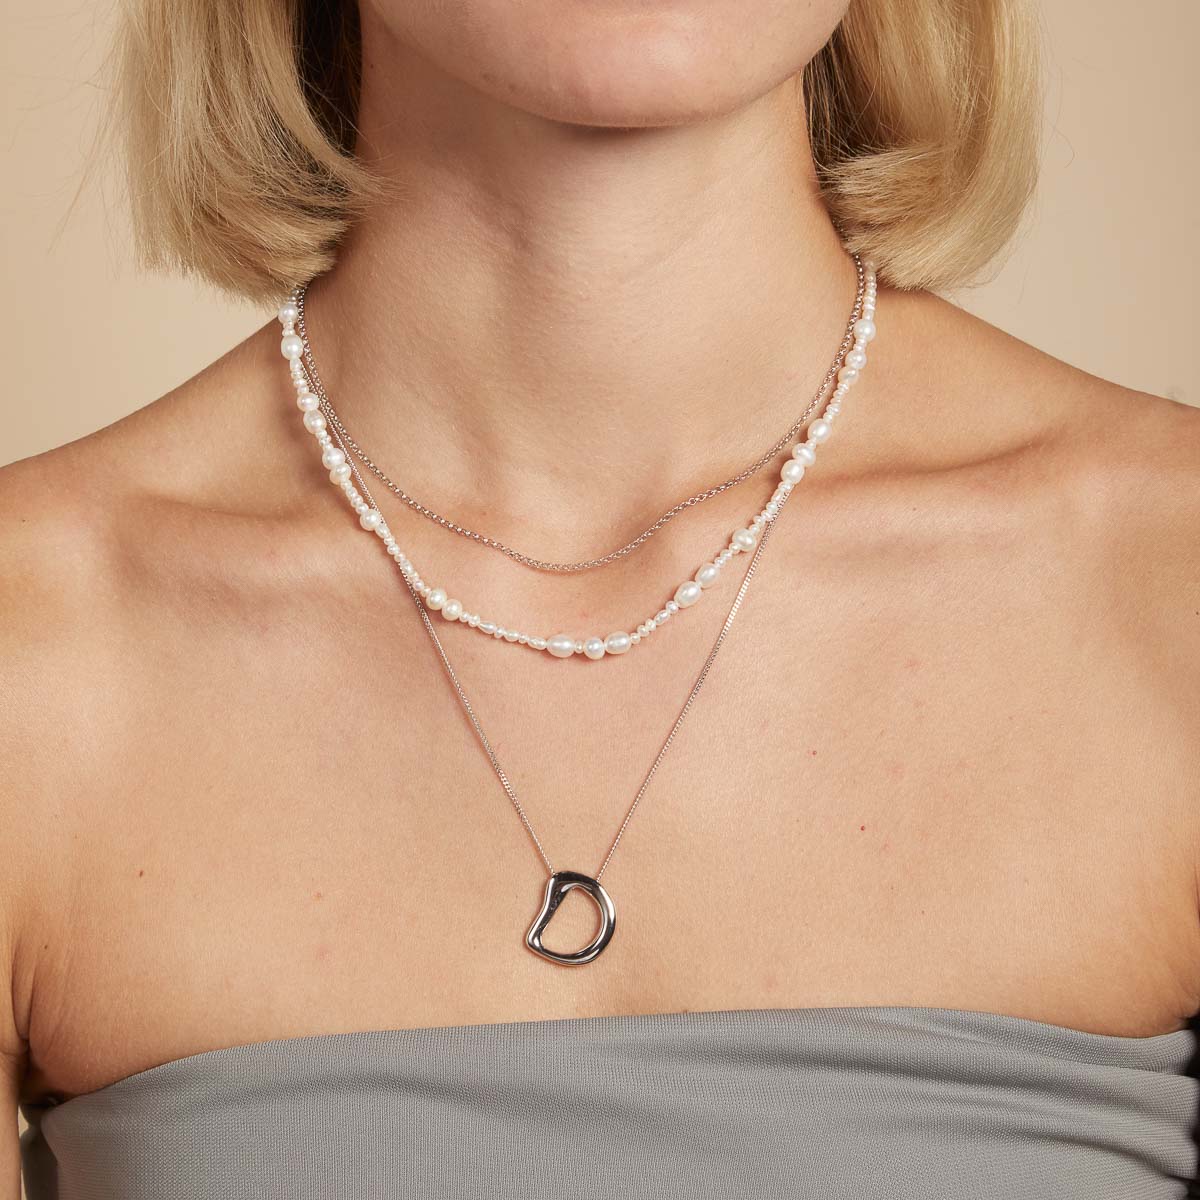 D Initial Bold Pendant Necklace in Silver